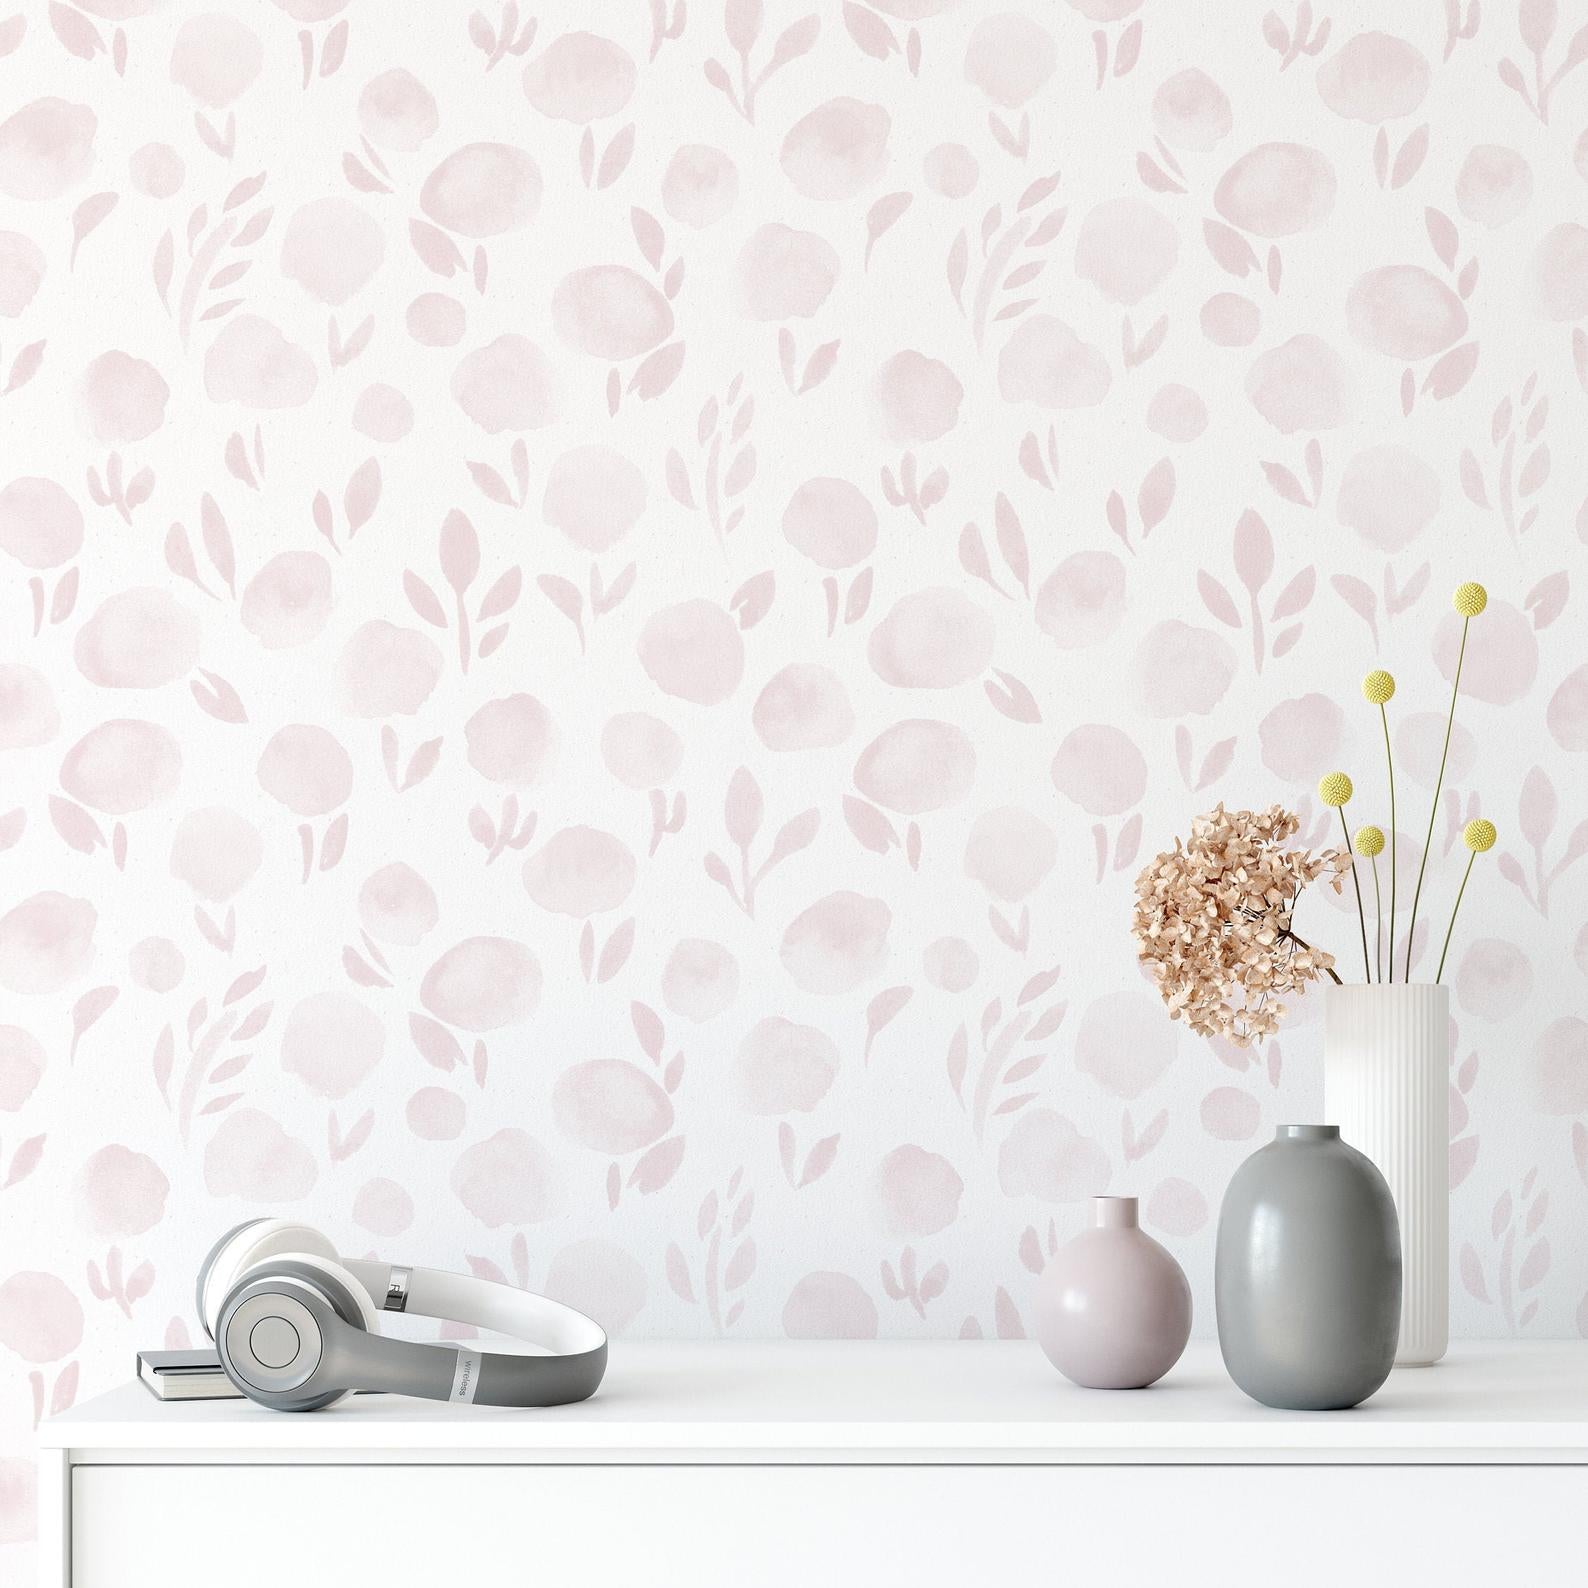 Interior setting with 'Subtle Botanica Wallpaper - II' adorning the wall, complemented by modern decor including a white vase with dried flowers, a round pink vase, and a pair of gray headphones resting on a white surface, creating a contemporary and peaceful atmosphere.